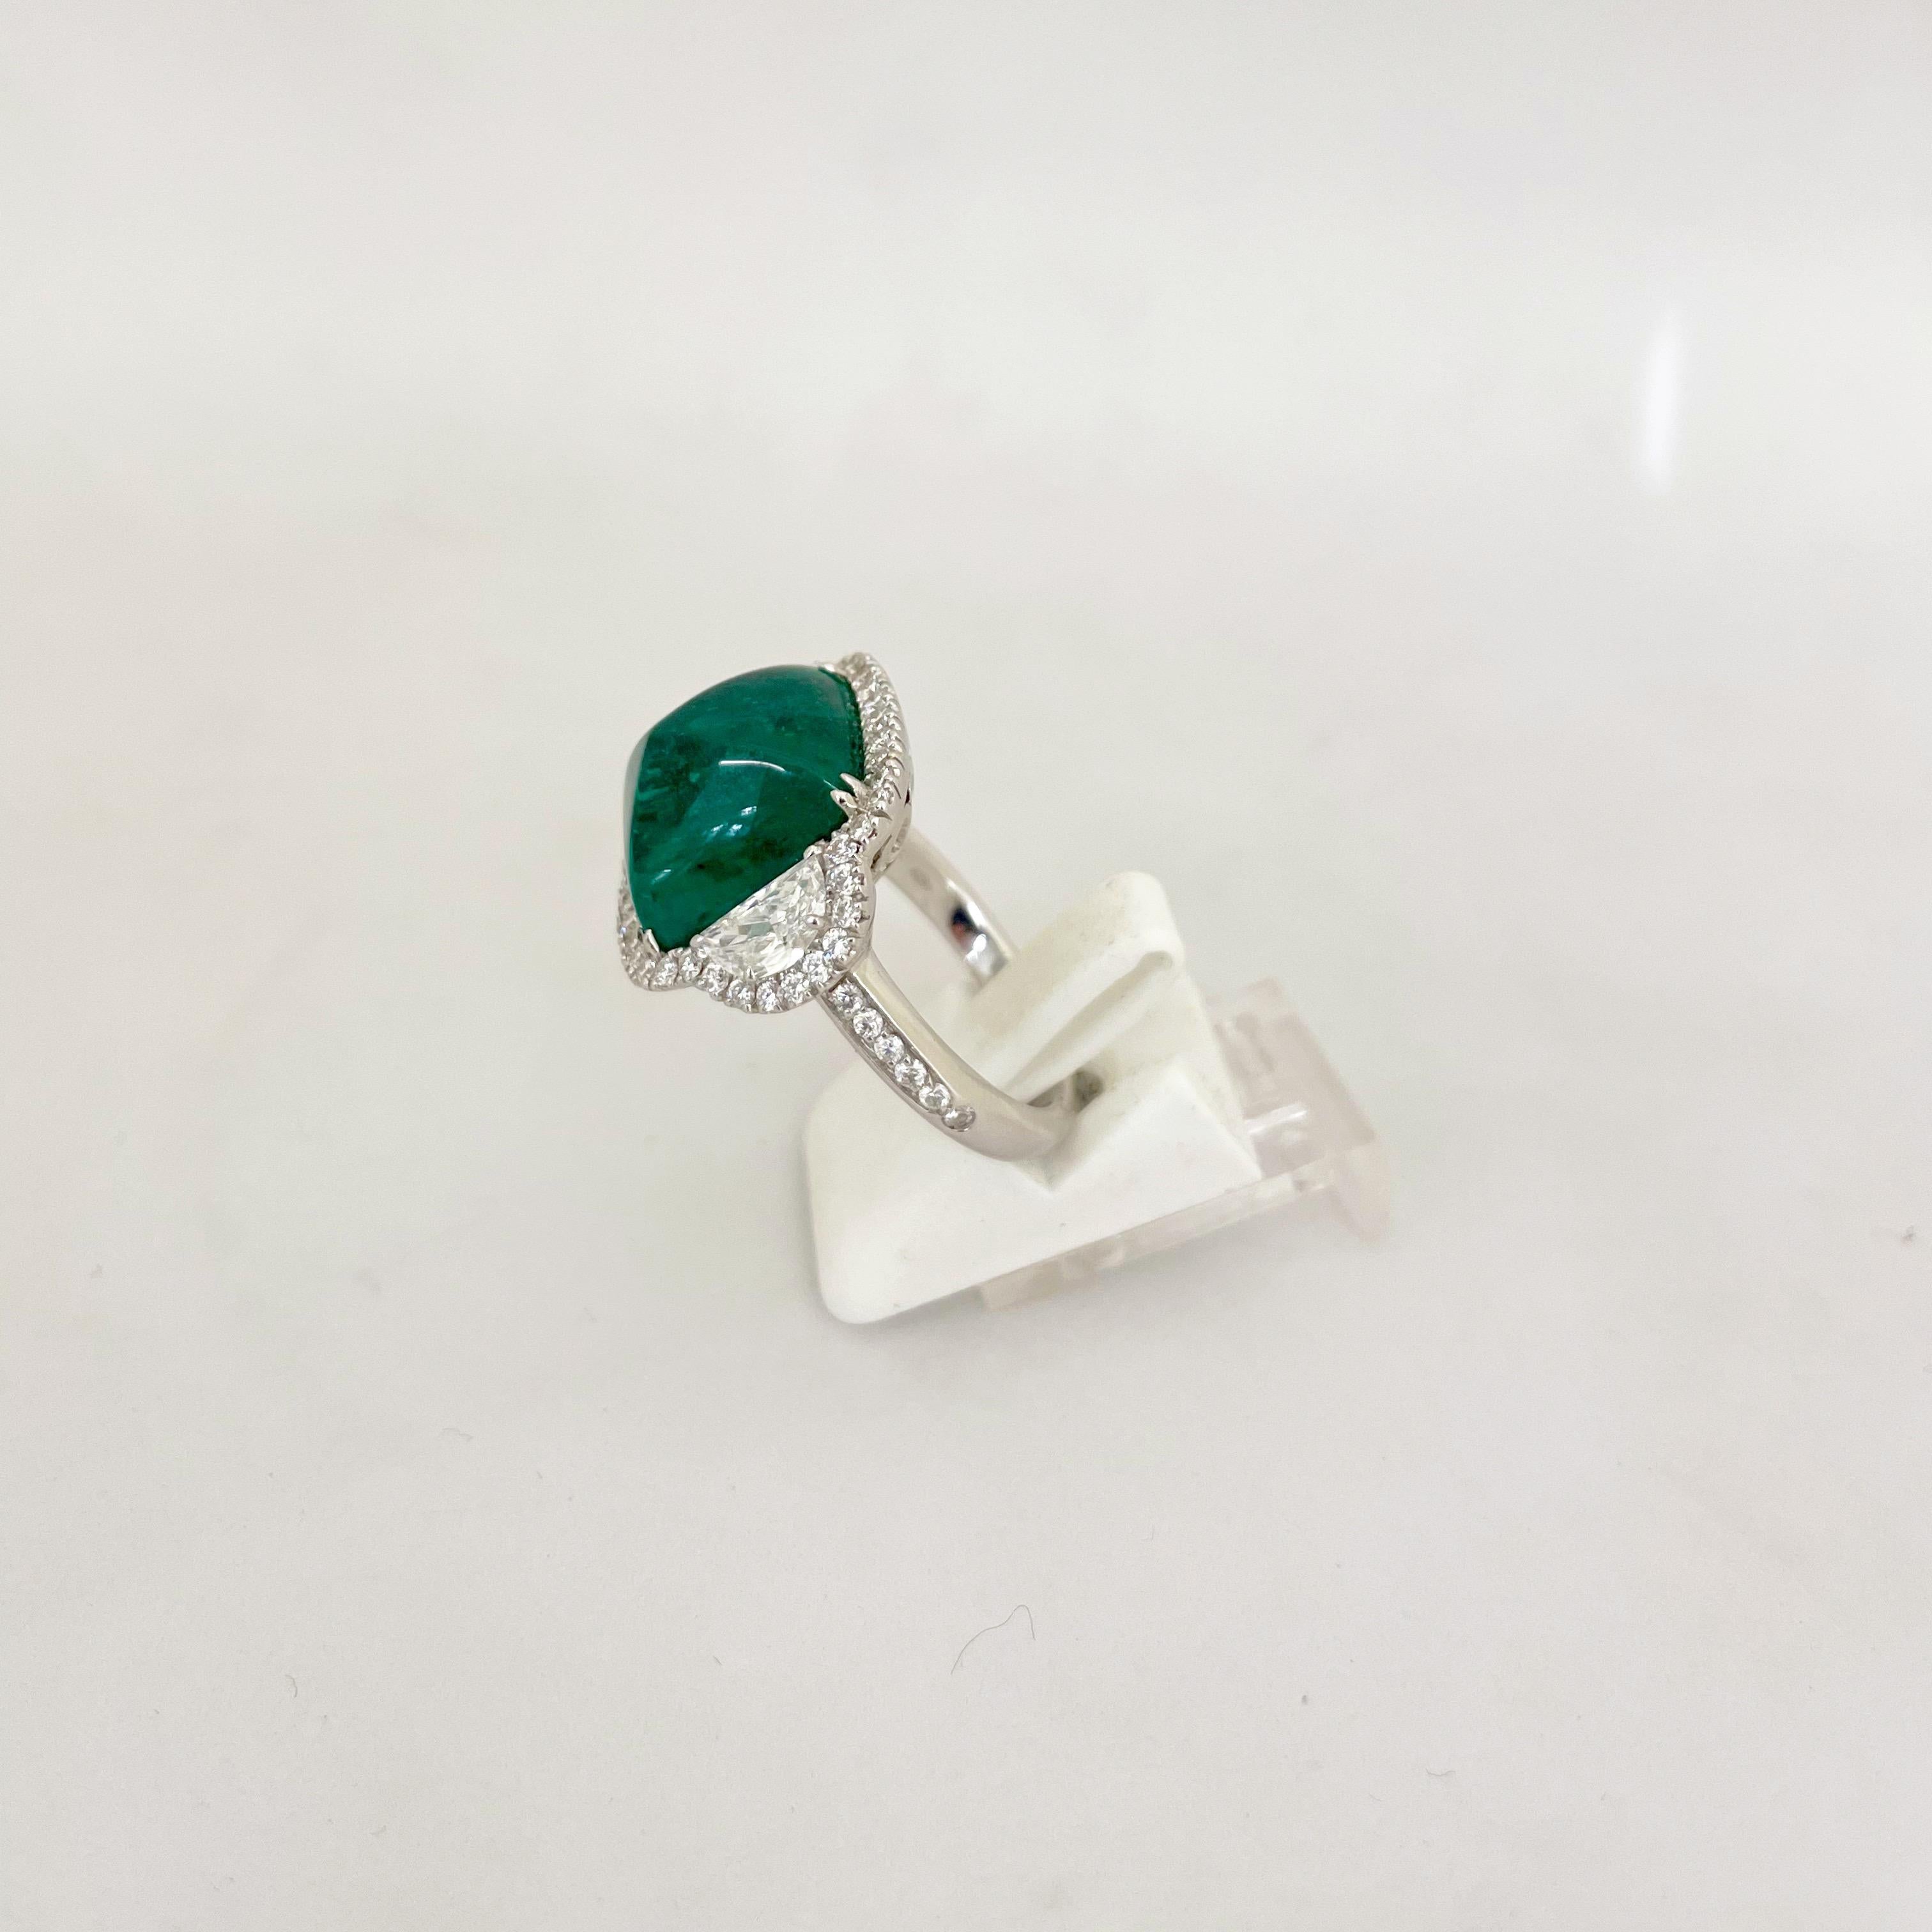 This truly show stopping sugarloaf cabochon emerald is flanked by half-moon diamonds and surrounded by a micro-pave diamond bezel, with diamonds on the shank of the ring. 
The emerald is 10.58 ct 
Half moon diamonds total 0.84cts 
Round diamond